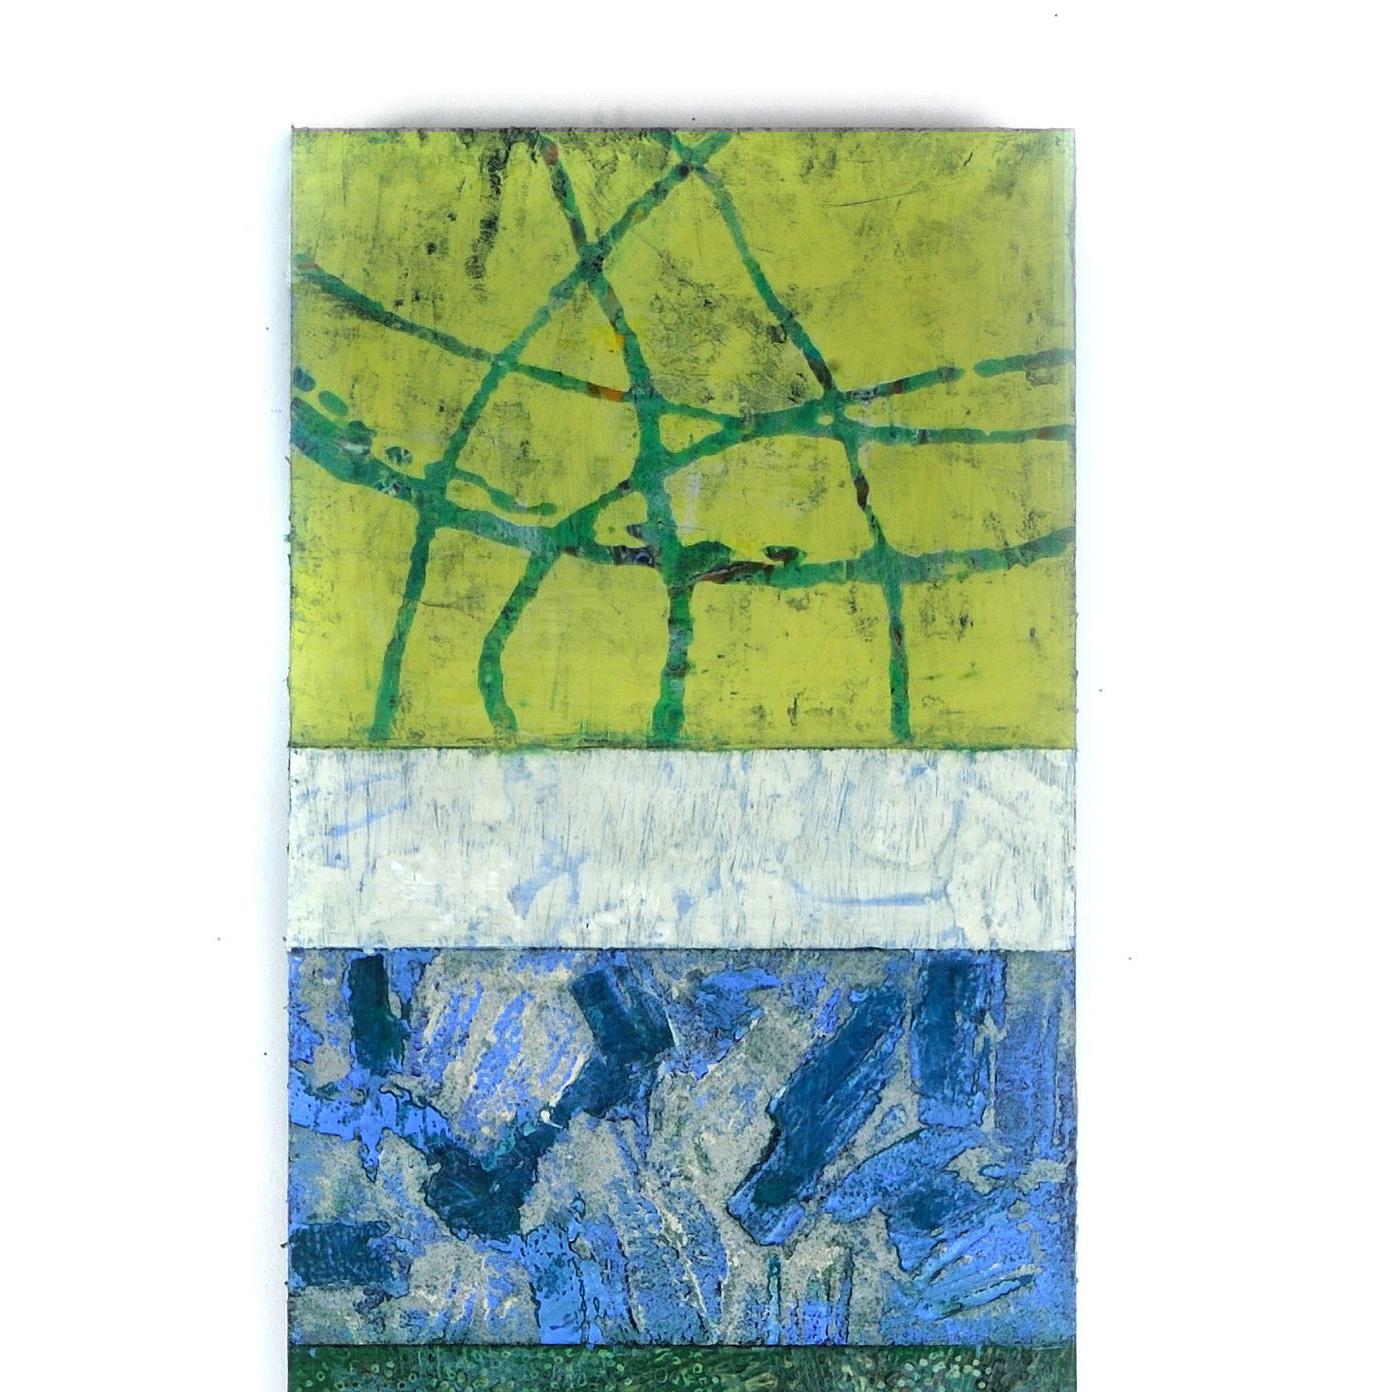 Strata 18-1, acrylic and wax on metal, 58 x 12 inches. Blue and green sectors - Contemporary Painting by Francie Hester